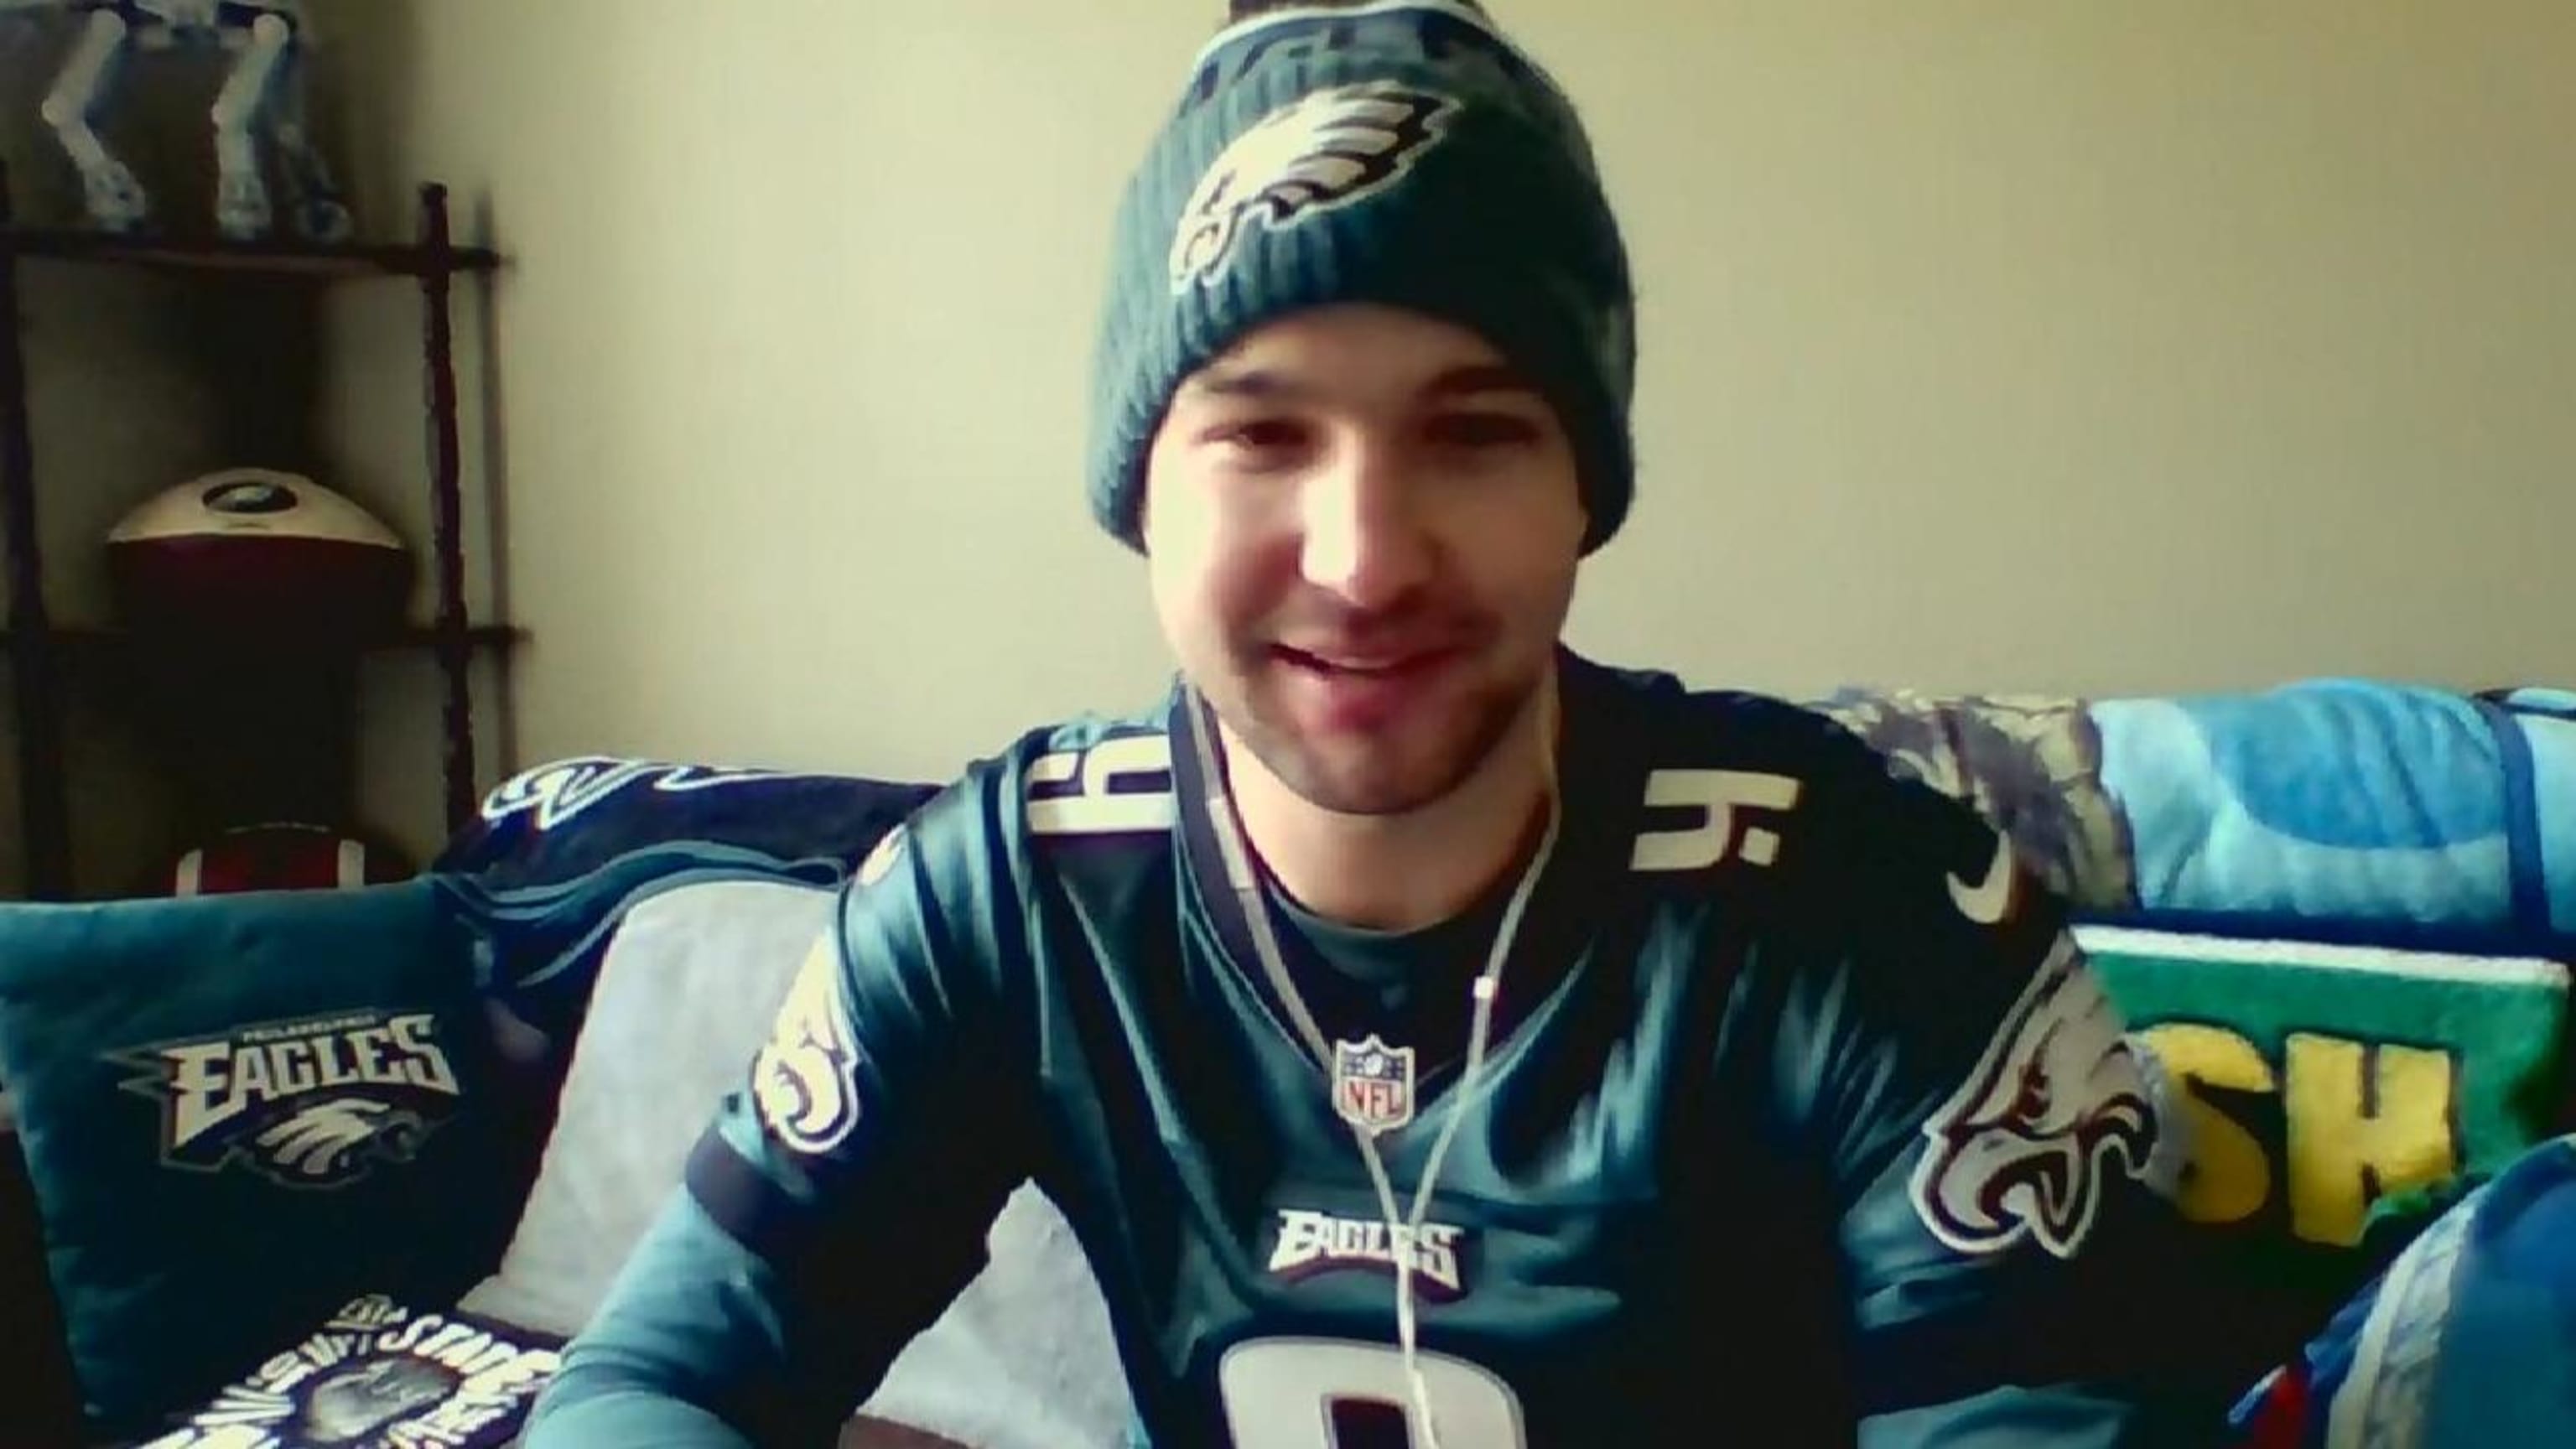 Tommy Kahnle went on 'Hot Stove' fully decked out in Eagles gear because  he's pumped up